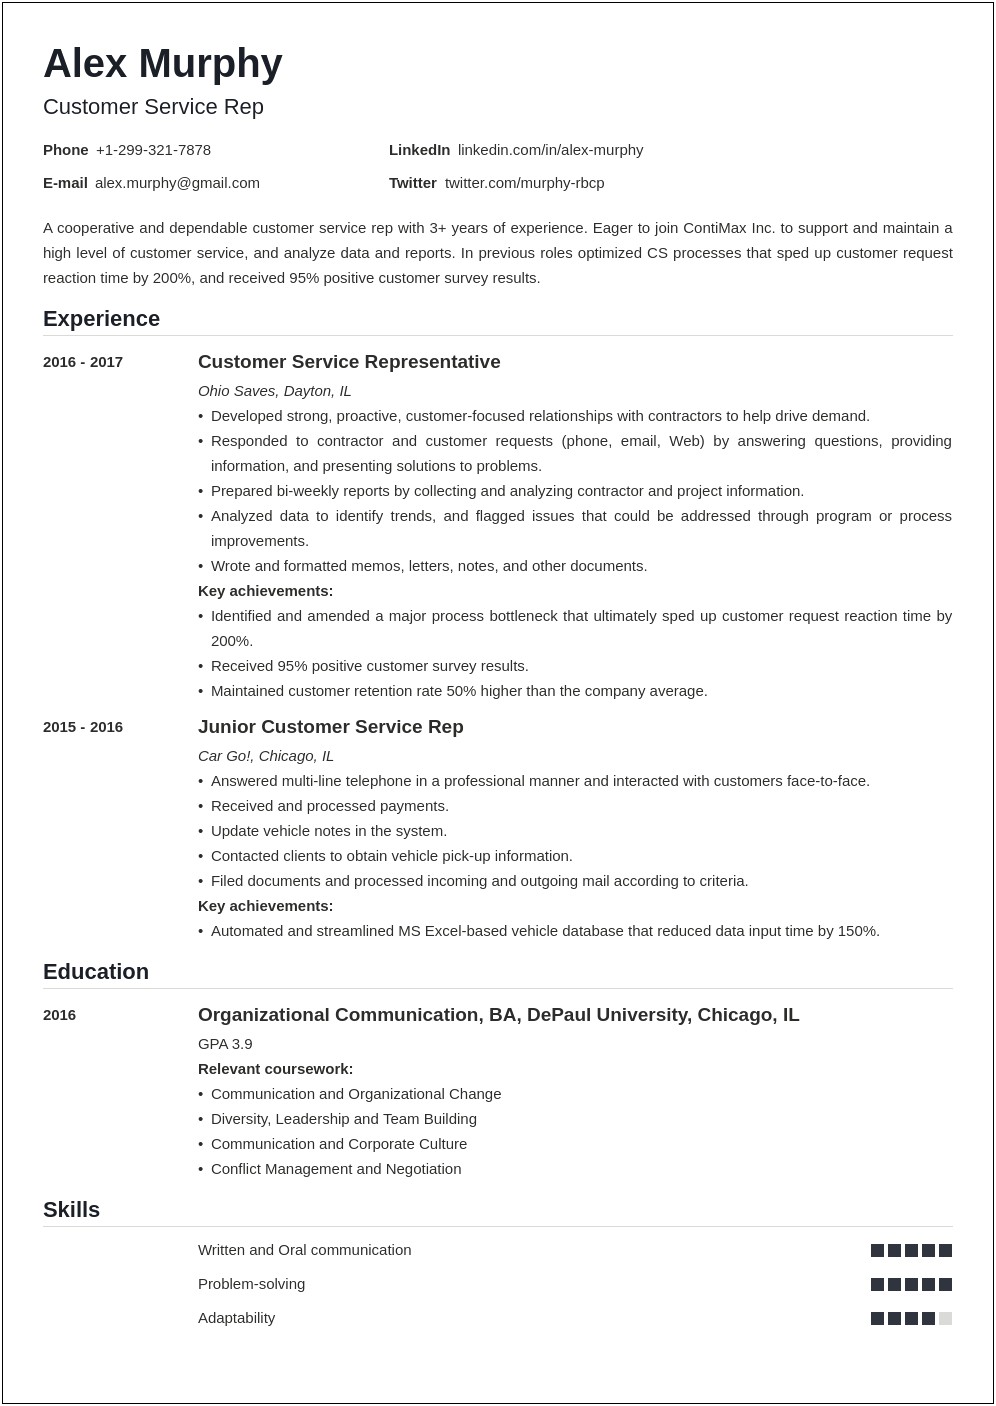 Sample Resume For Customer Service Representative With Experience